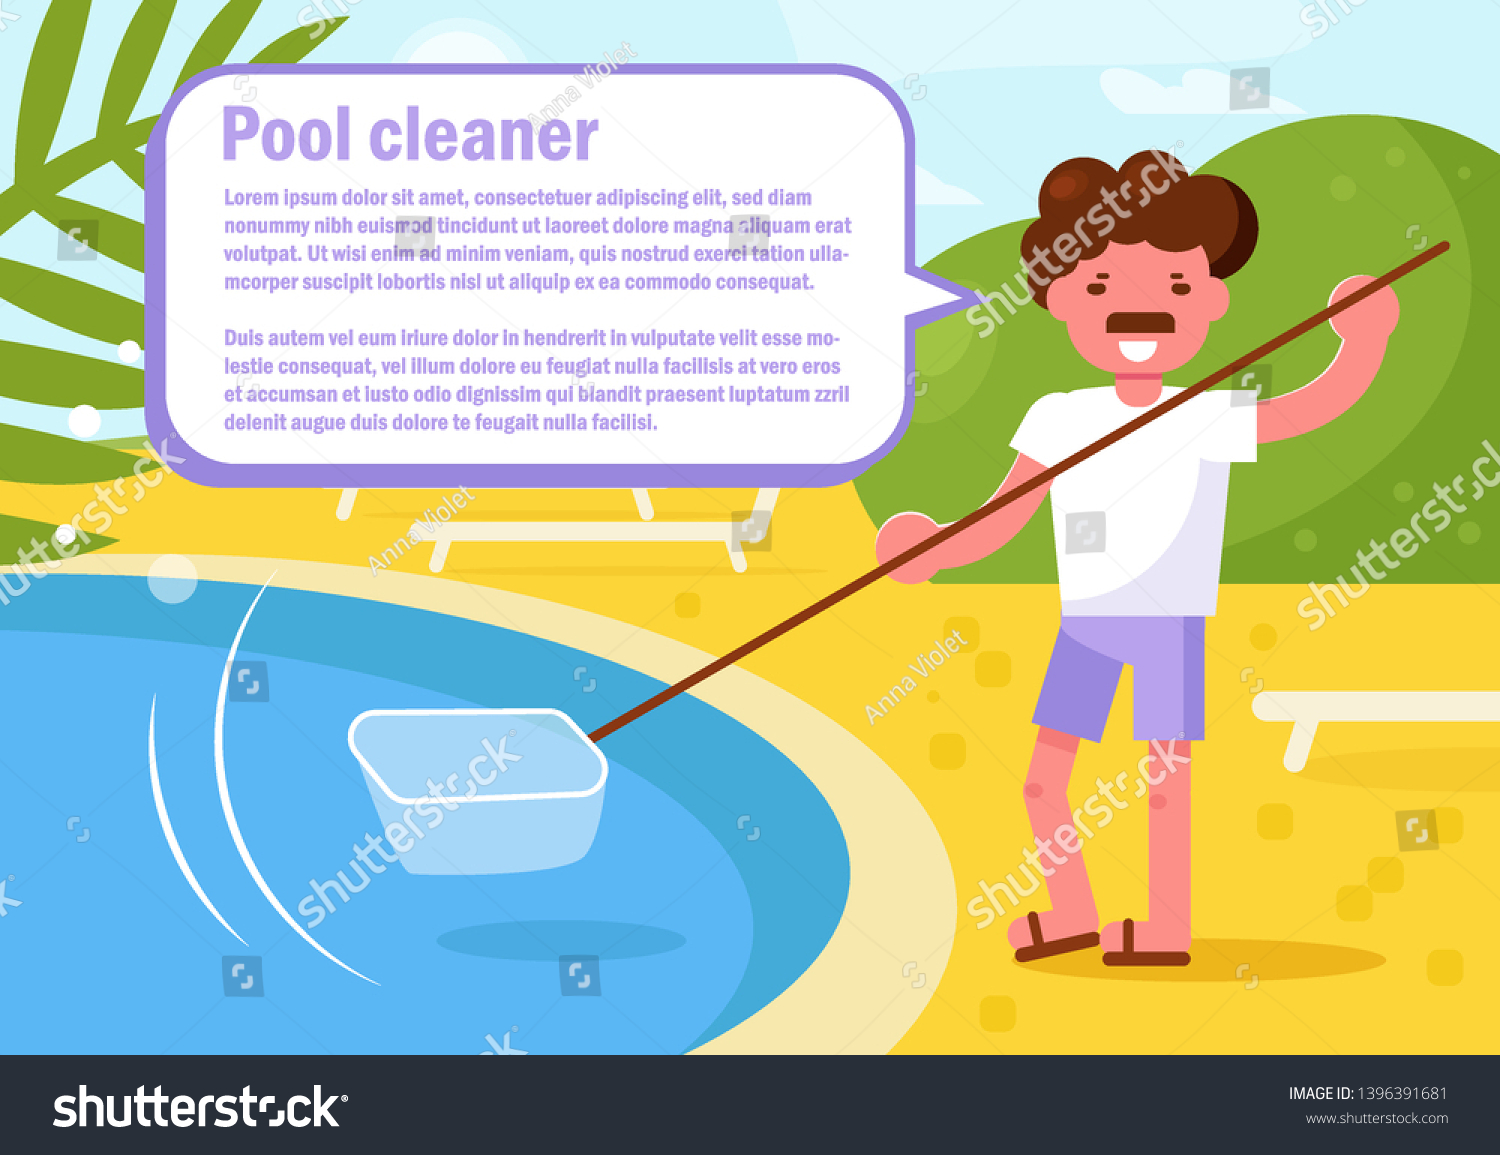 Pool Cleaner Vector Cartoon Isolated Art Flat Royalty Free Stock Vector 1396391681 3315